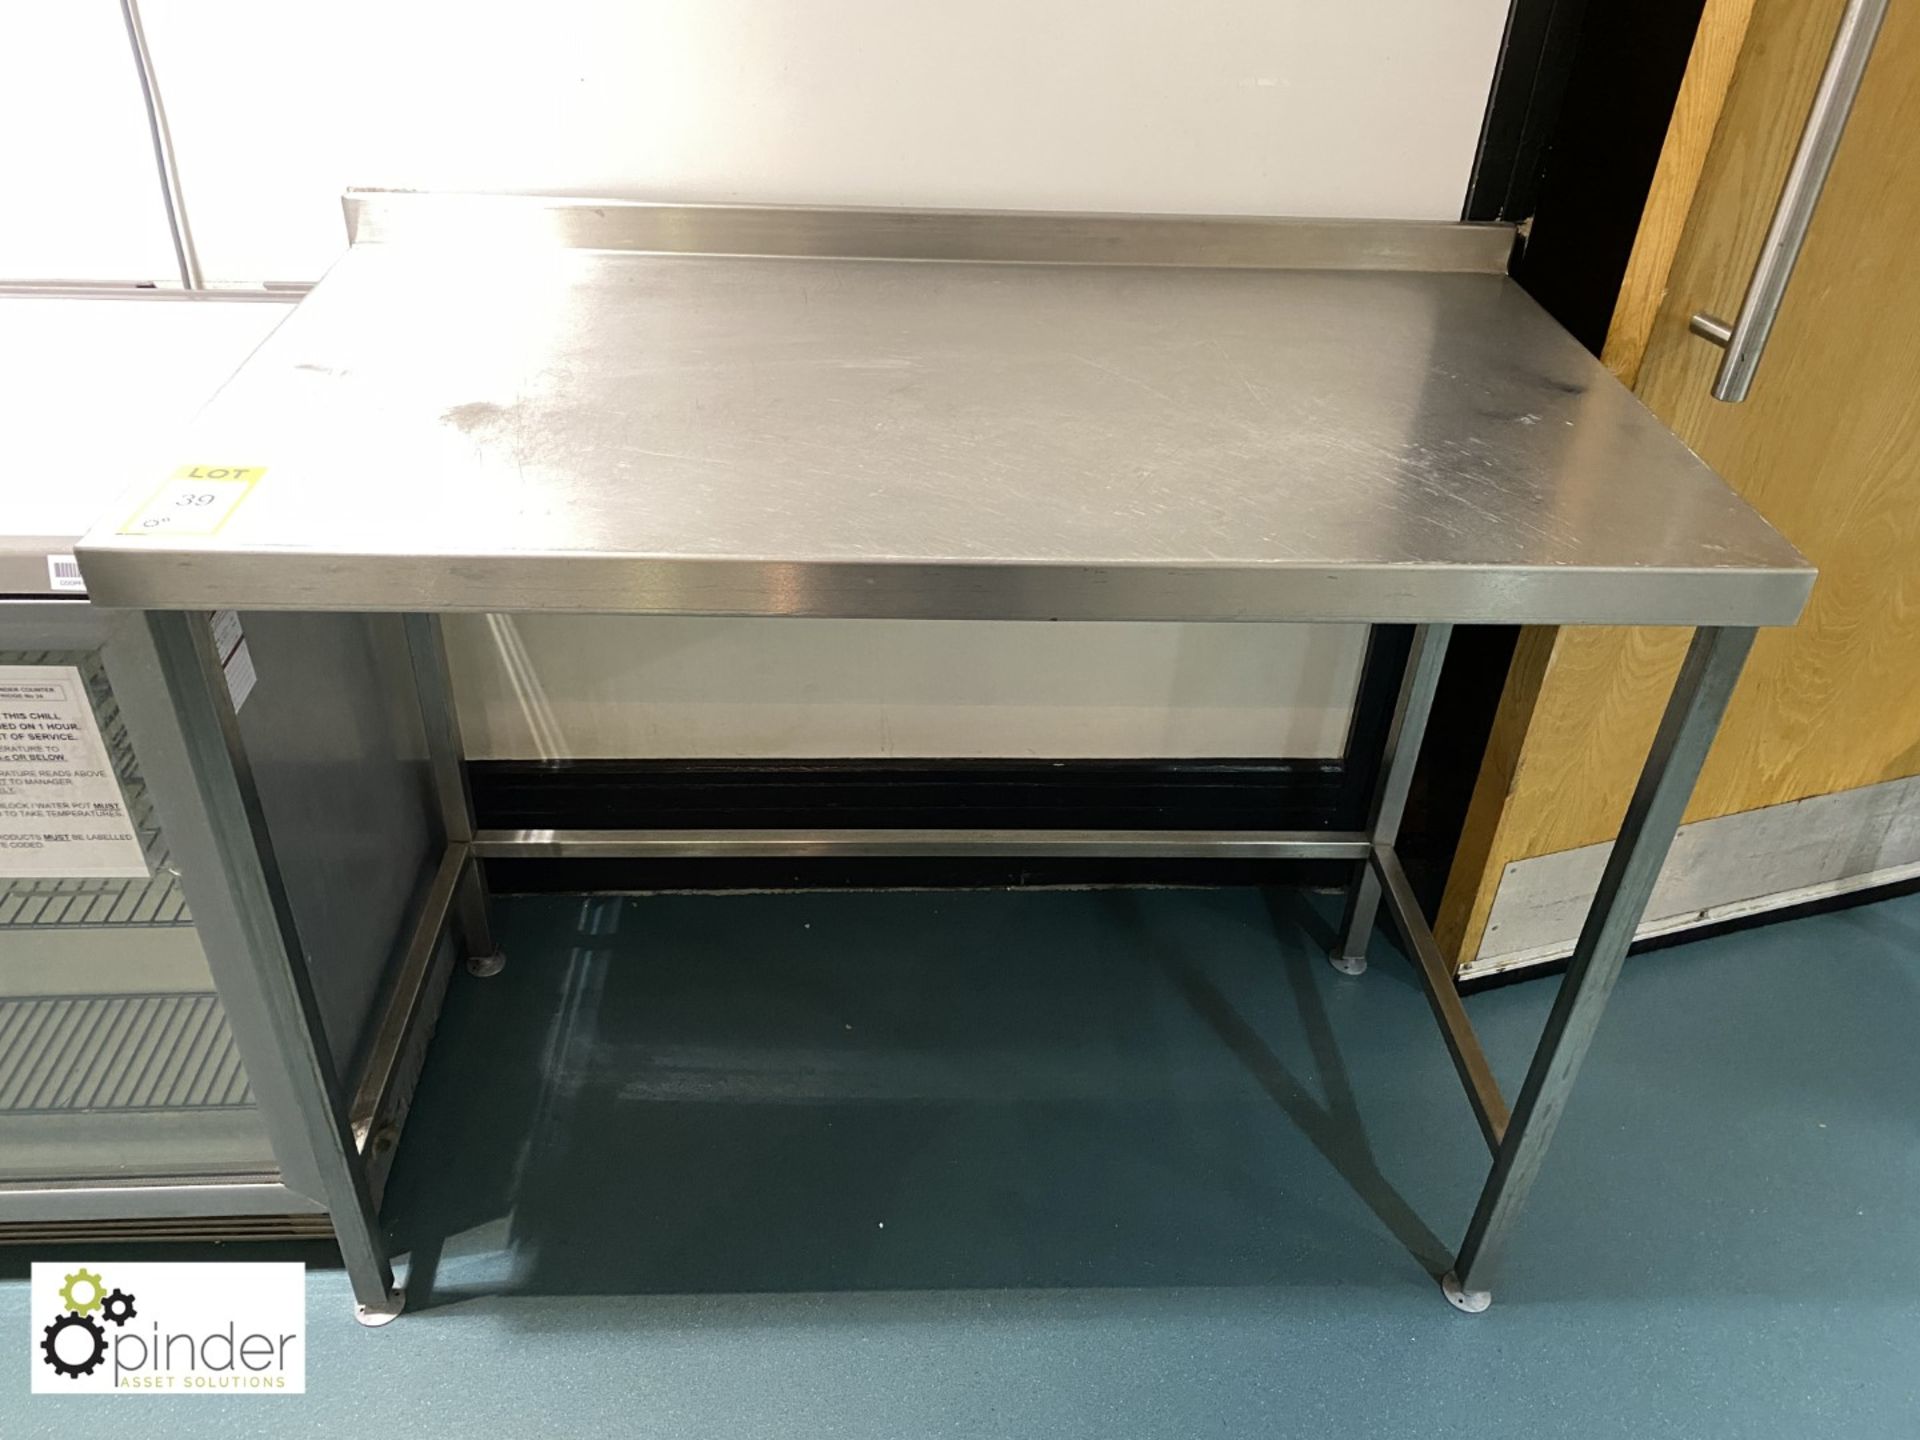 Stainless steel Preparation Table, 1200mm x 650mm, with raised rear lip (located in Canteen - Image 2 of 2